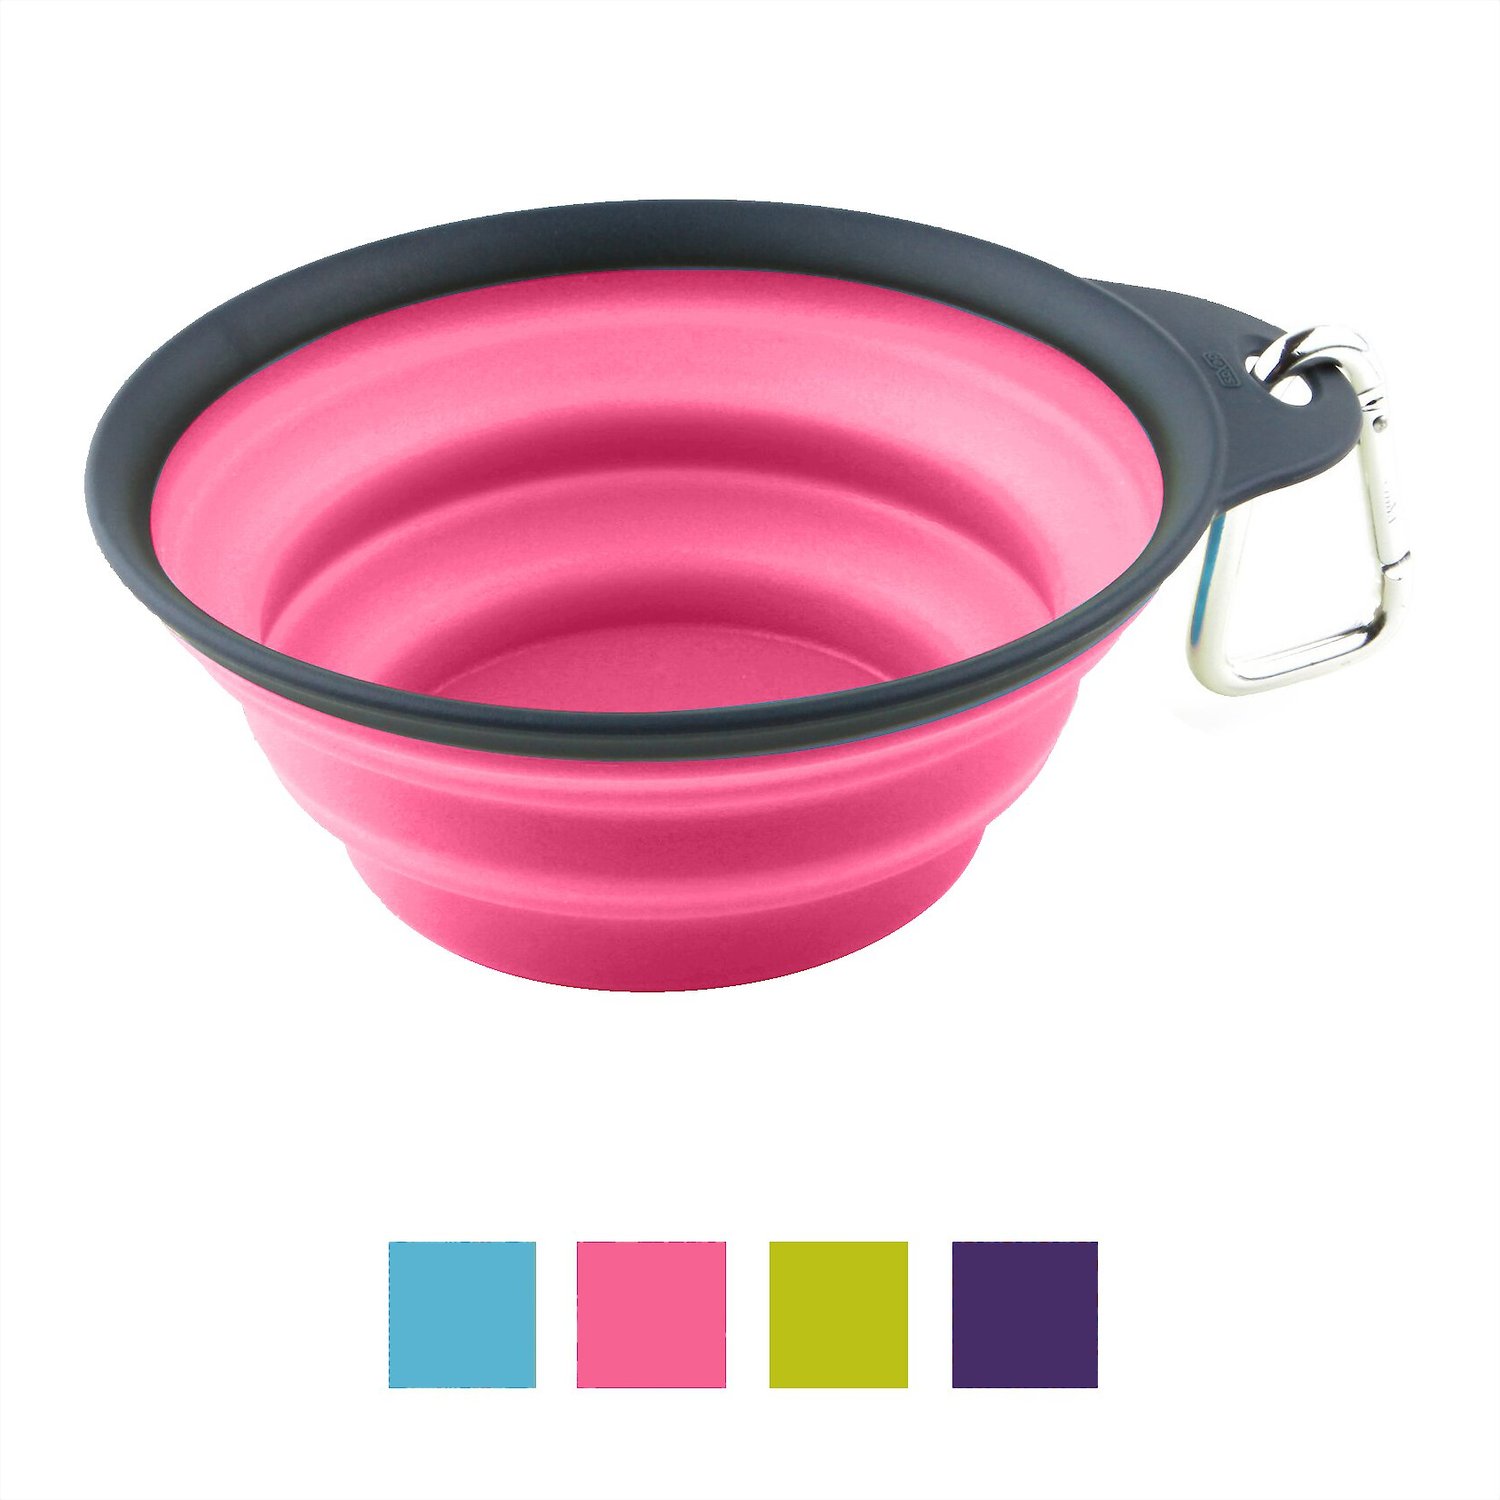 Dexas Popware for Pets Double Bowl Collapsible Travel Feeder 